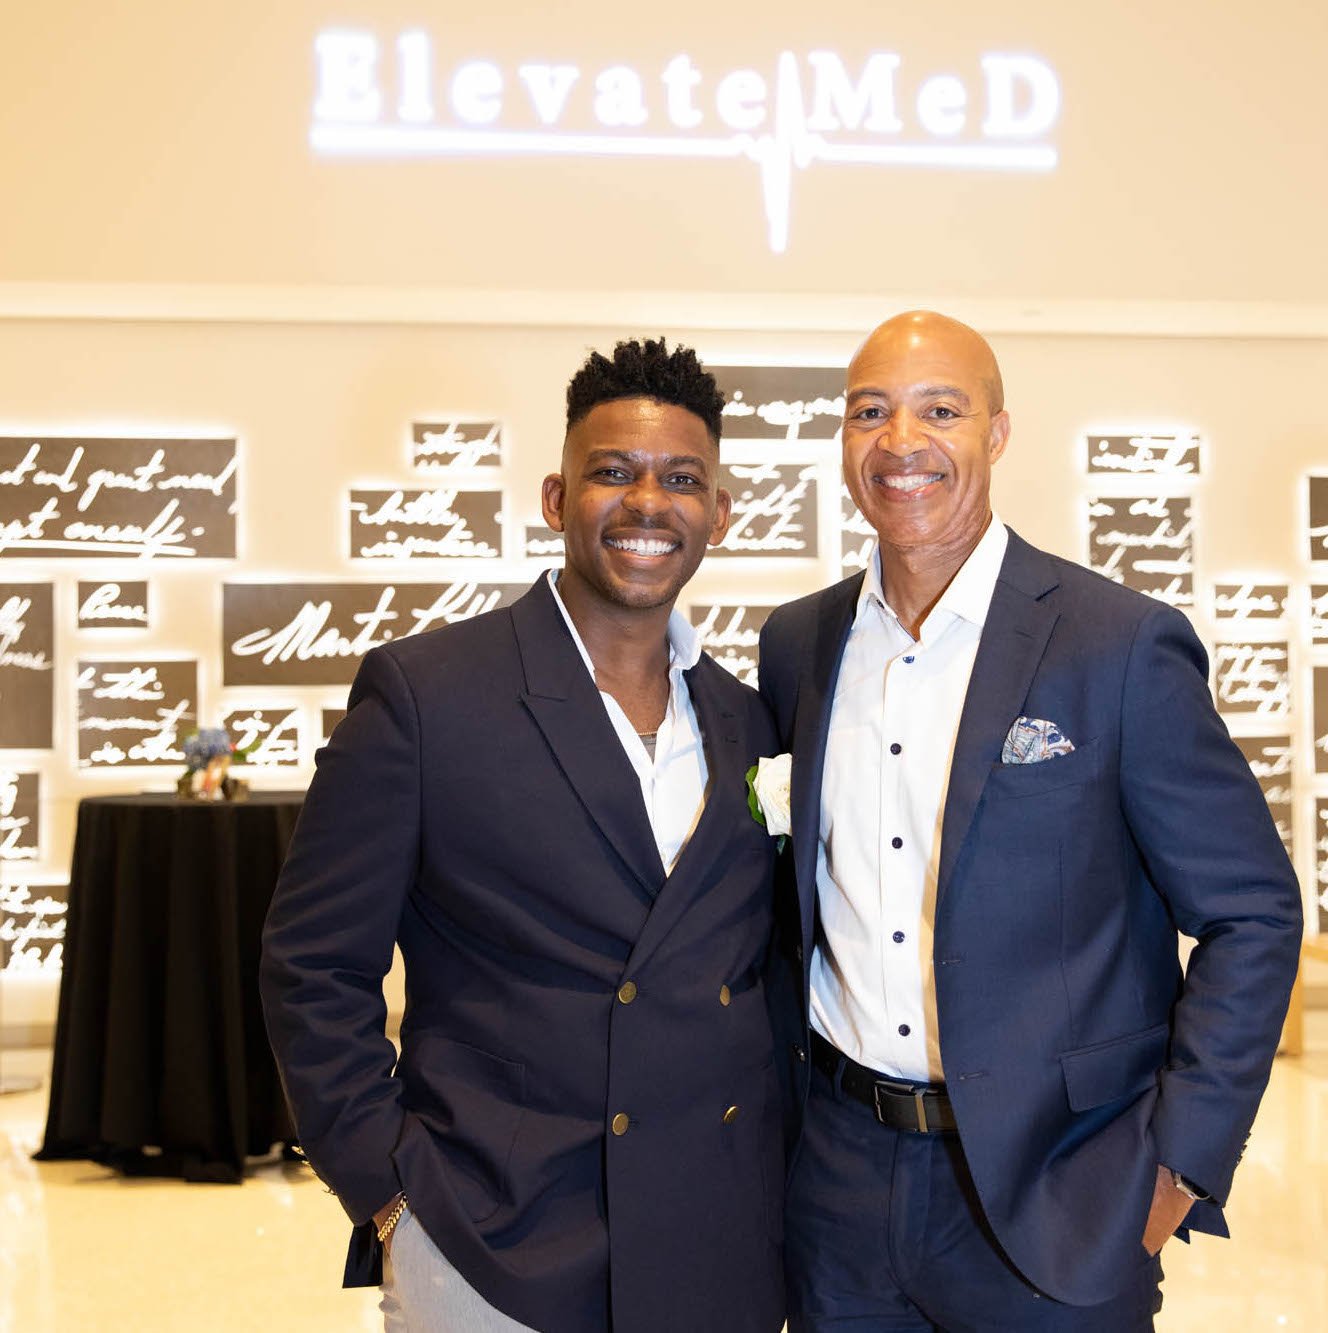 The ElevateMeD Scholars program is successful because of the physicians that volunteer and invest their time to support underrepresented medical students through mentorship. We're excited to announce our next cohort of scholars later this month and n